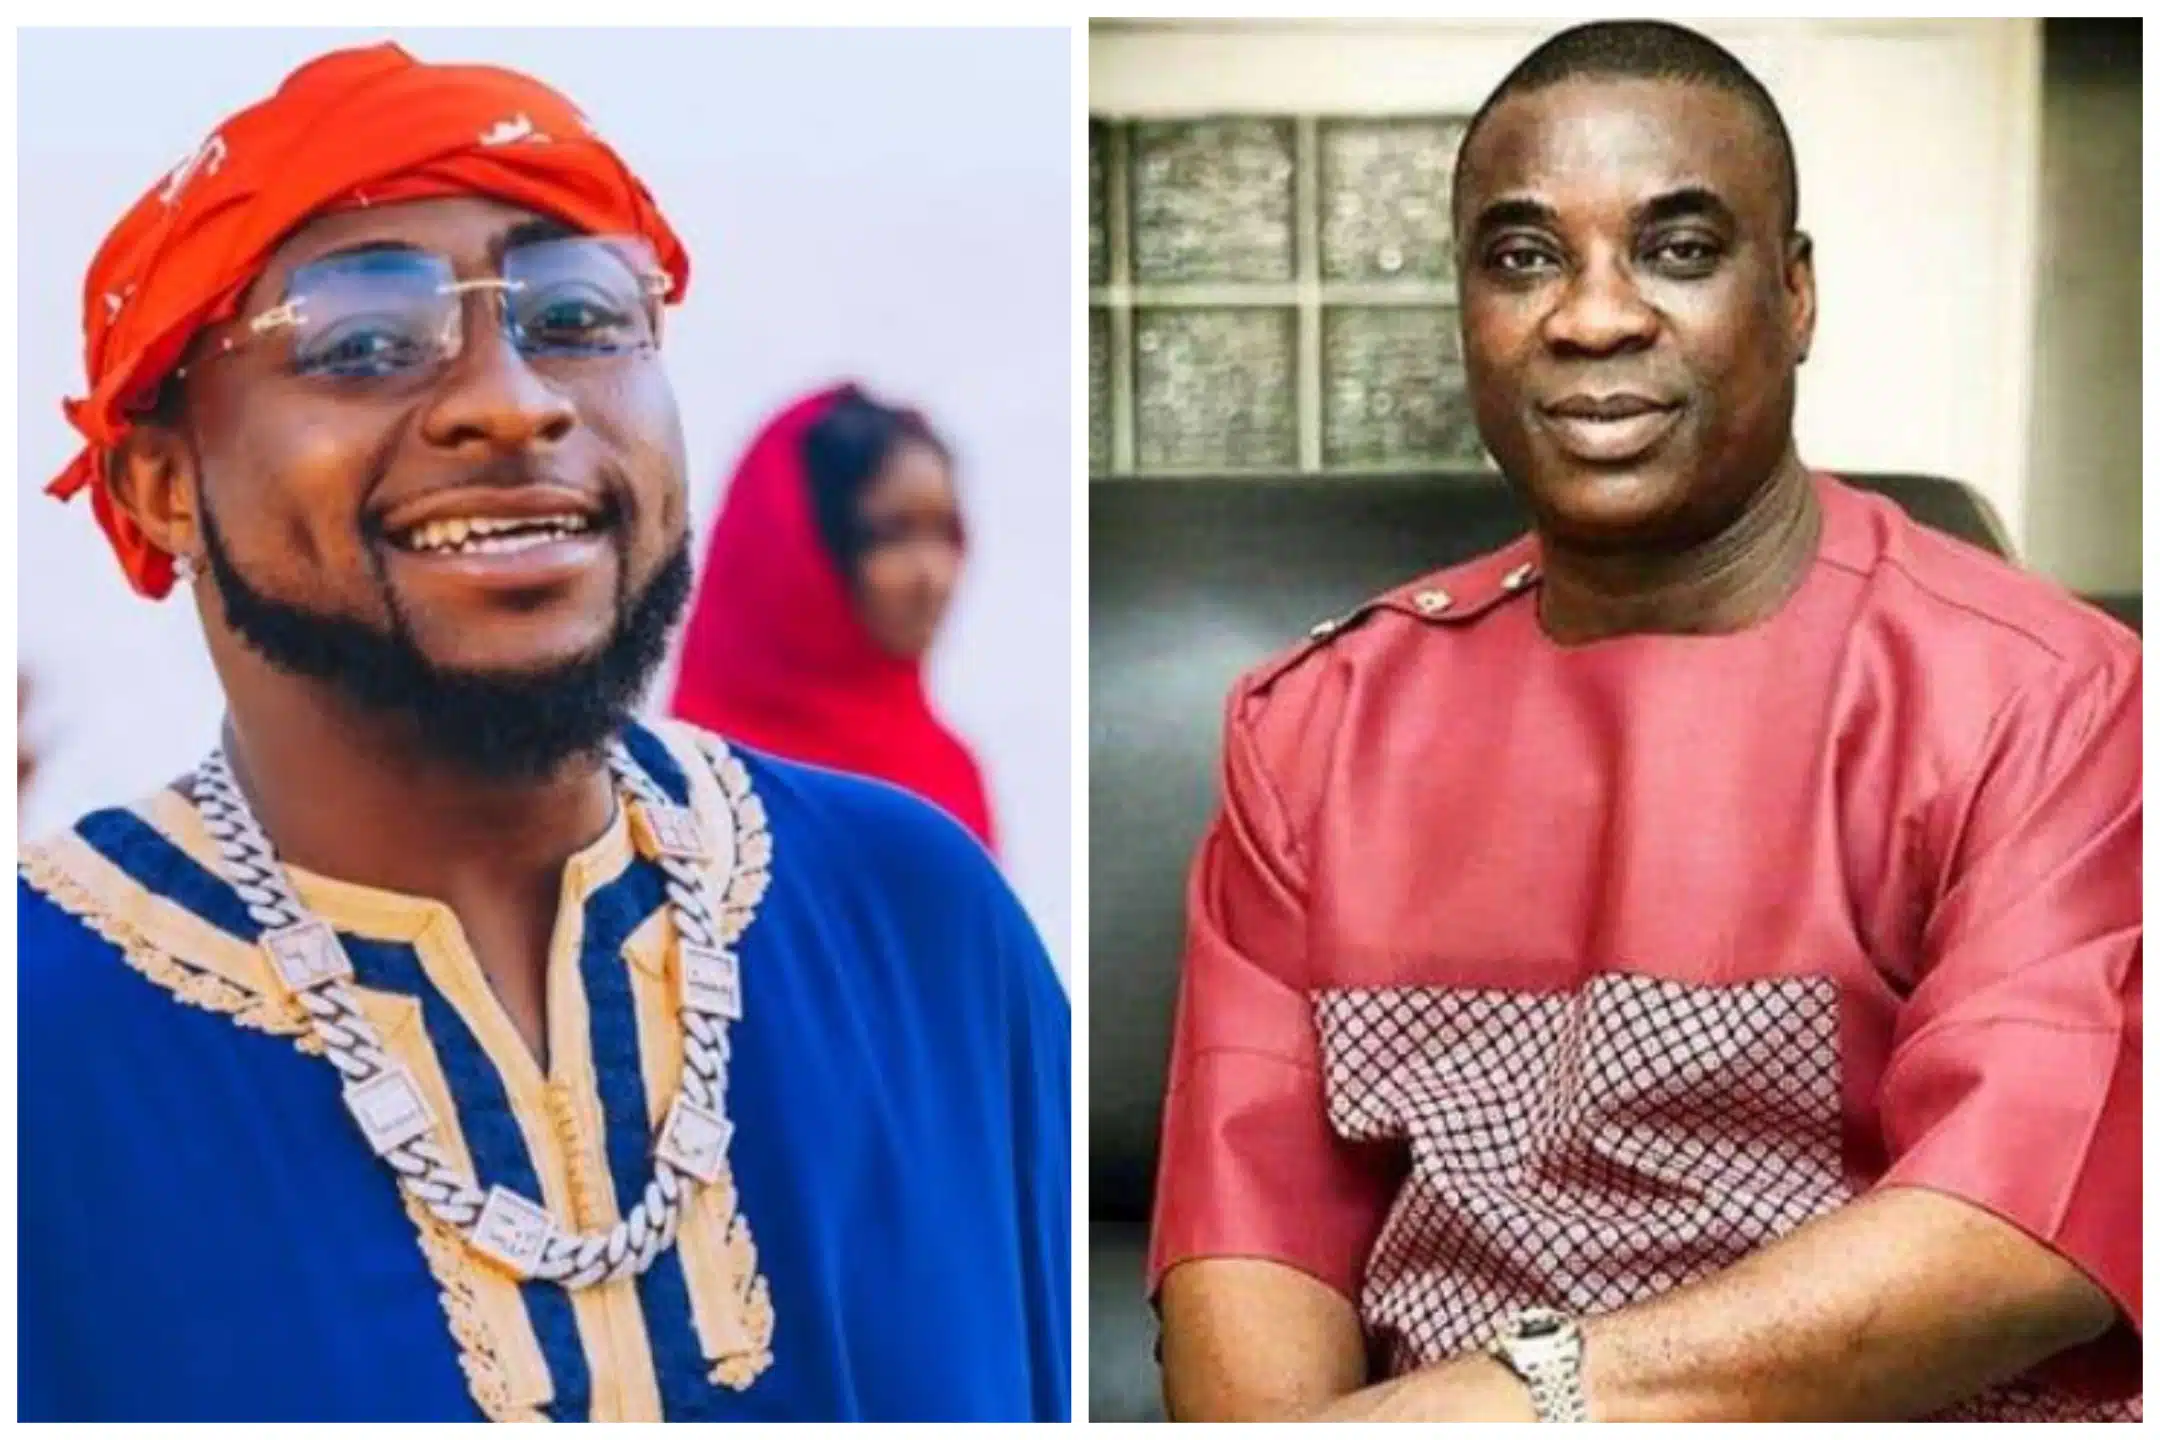 Timeless: KWAM1 Accused Of Infringing On Davido’s Intellectual Property